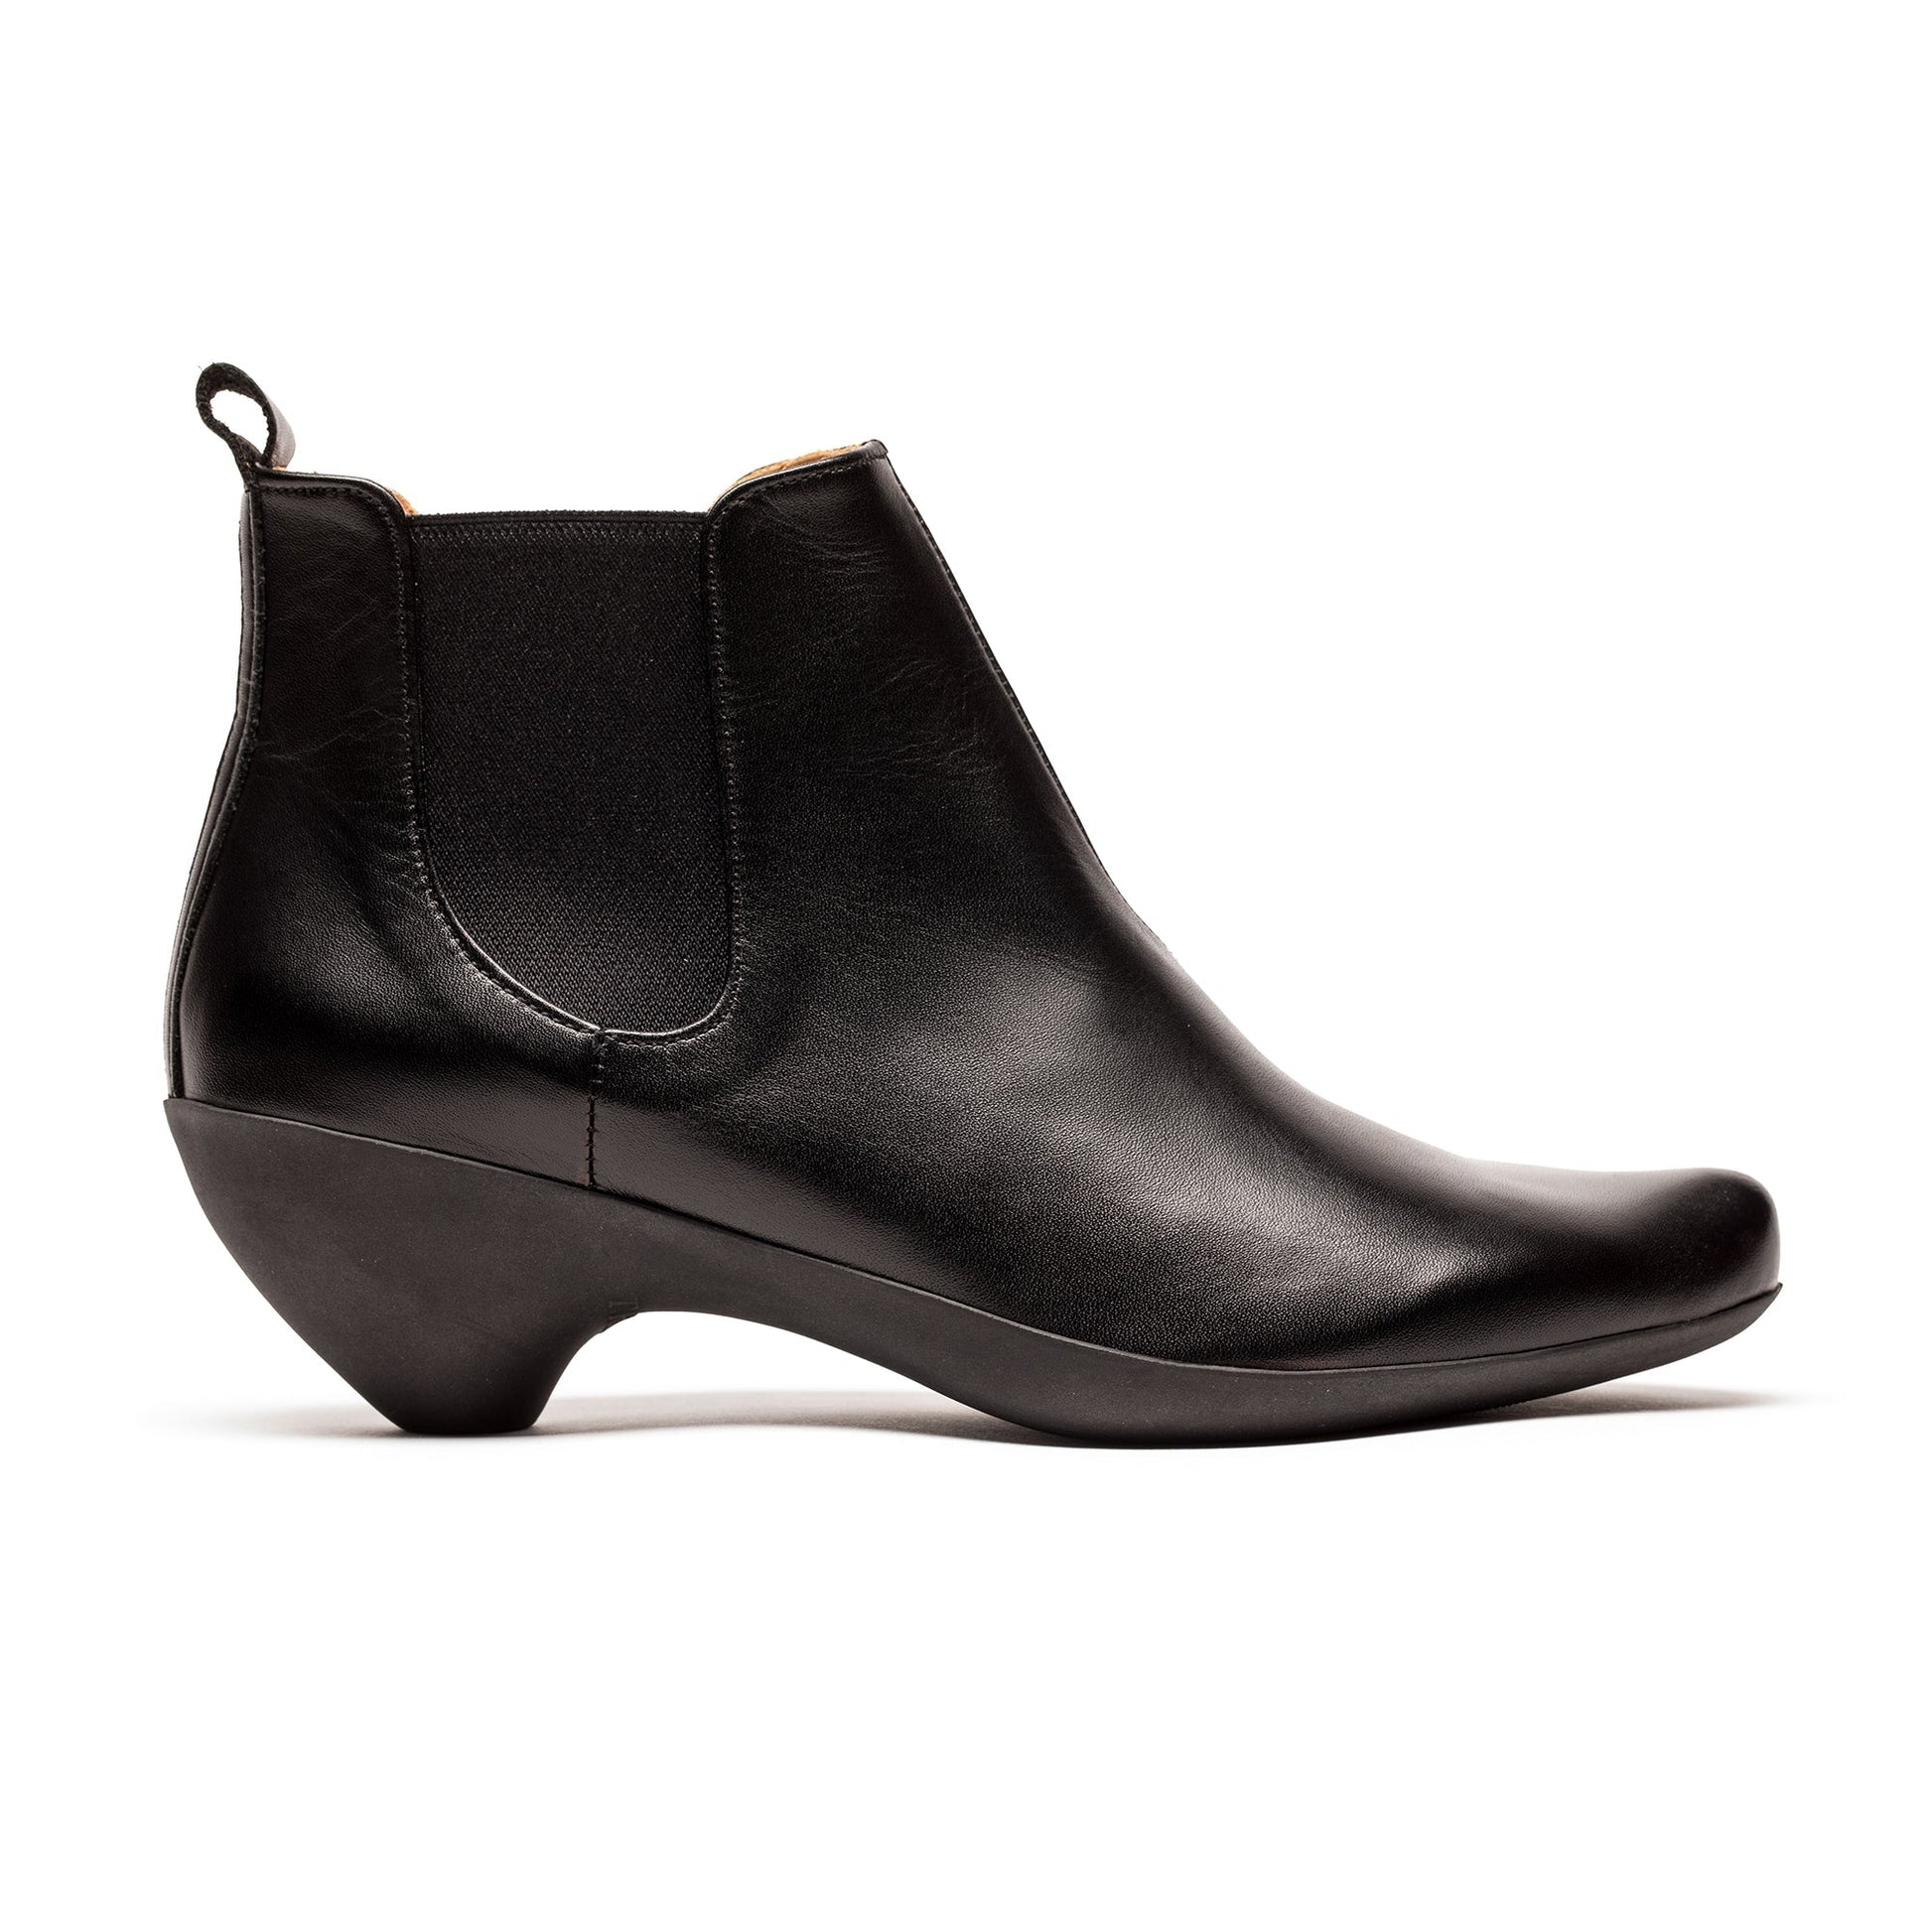 Black leather rubber mid heel cycle womens